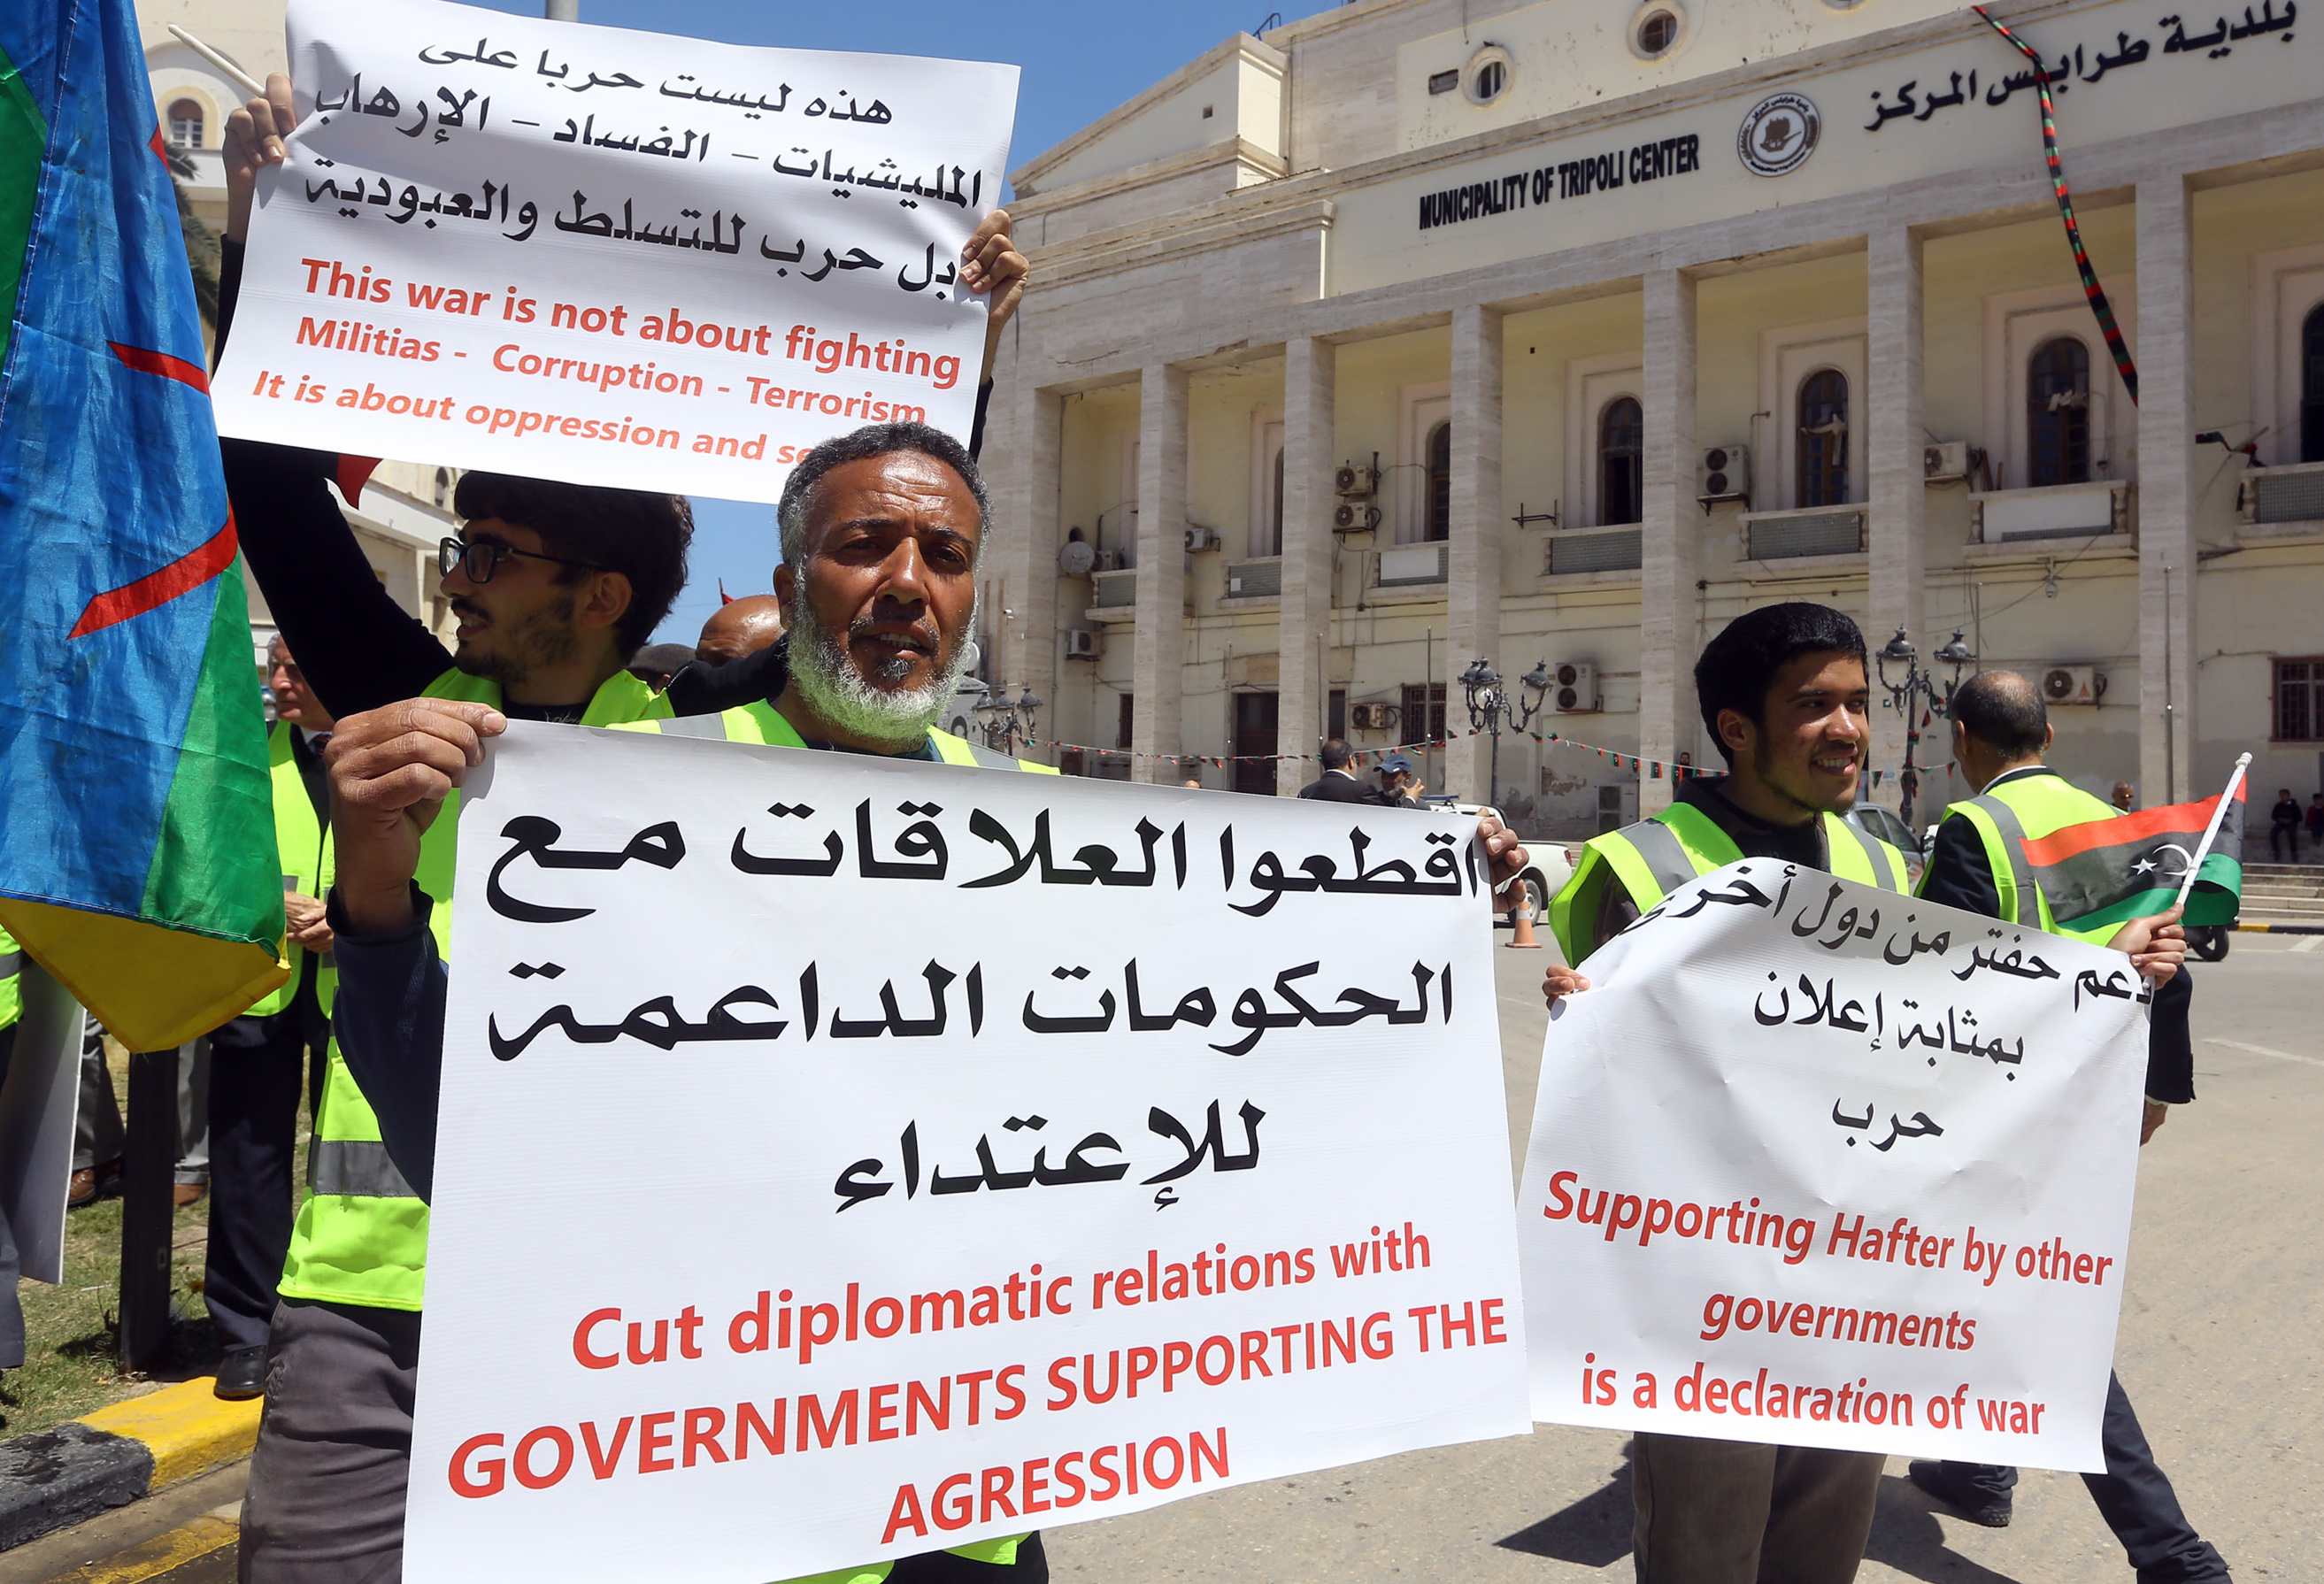 Libyan demonstrators hold signs against what they call foreign intervention in Libya, during a protest outside the municipality of Tripoli, on April 16, 2019 (AFP)